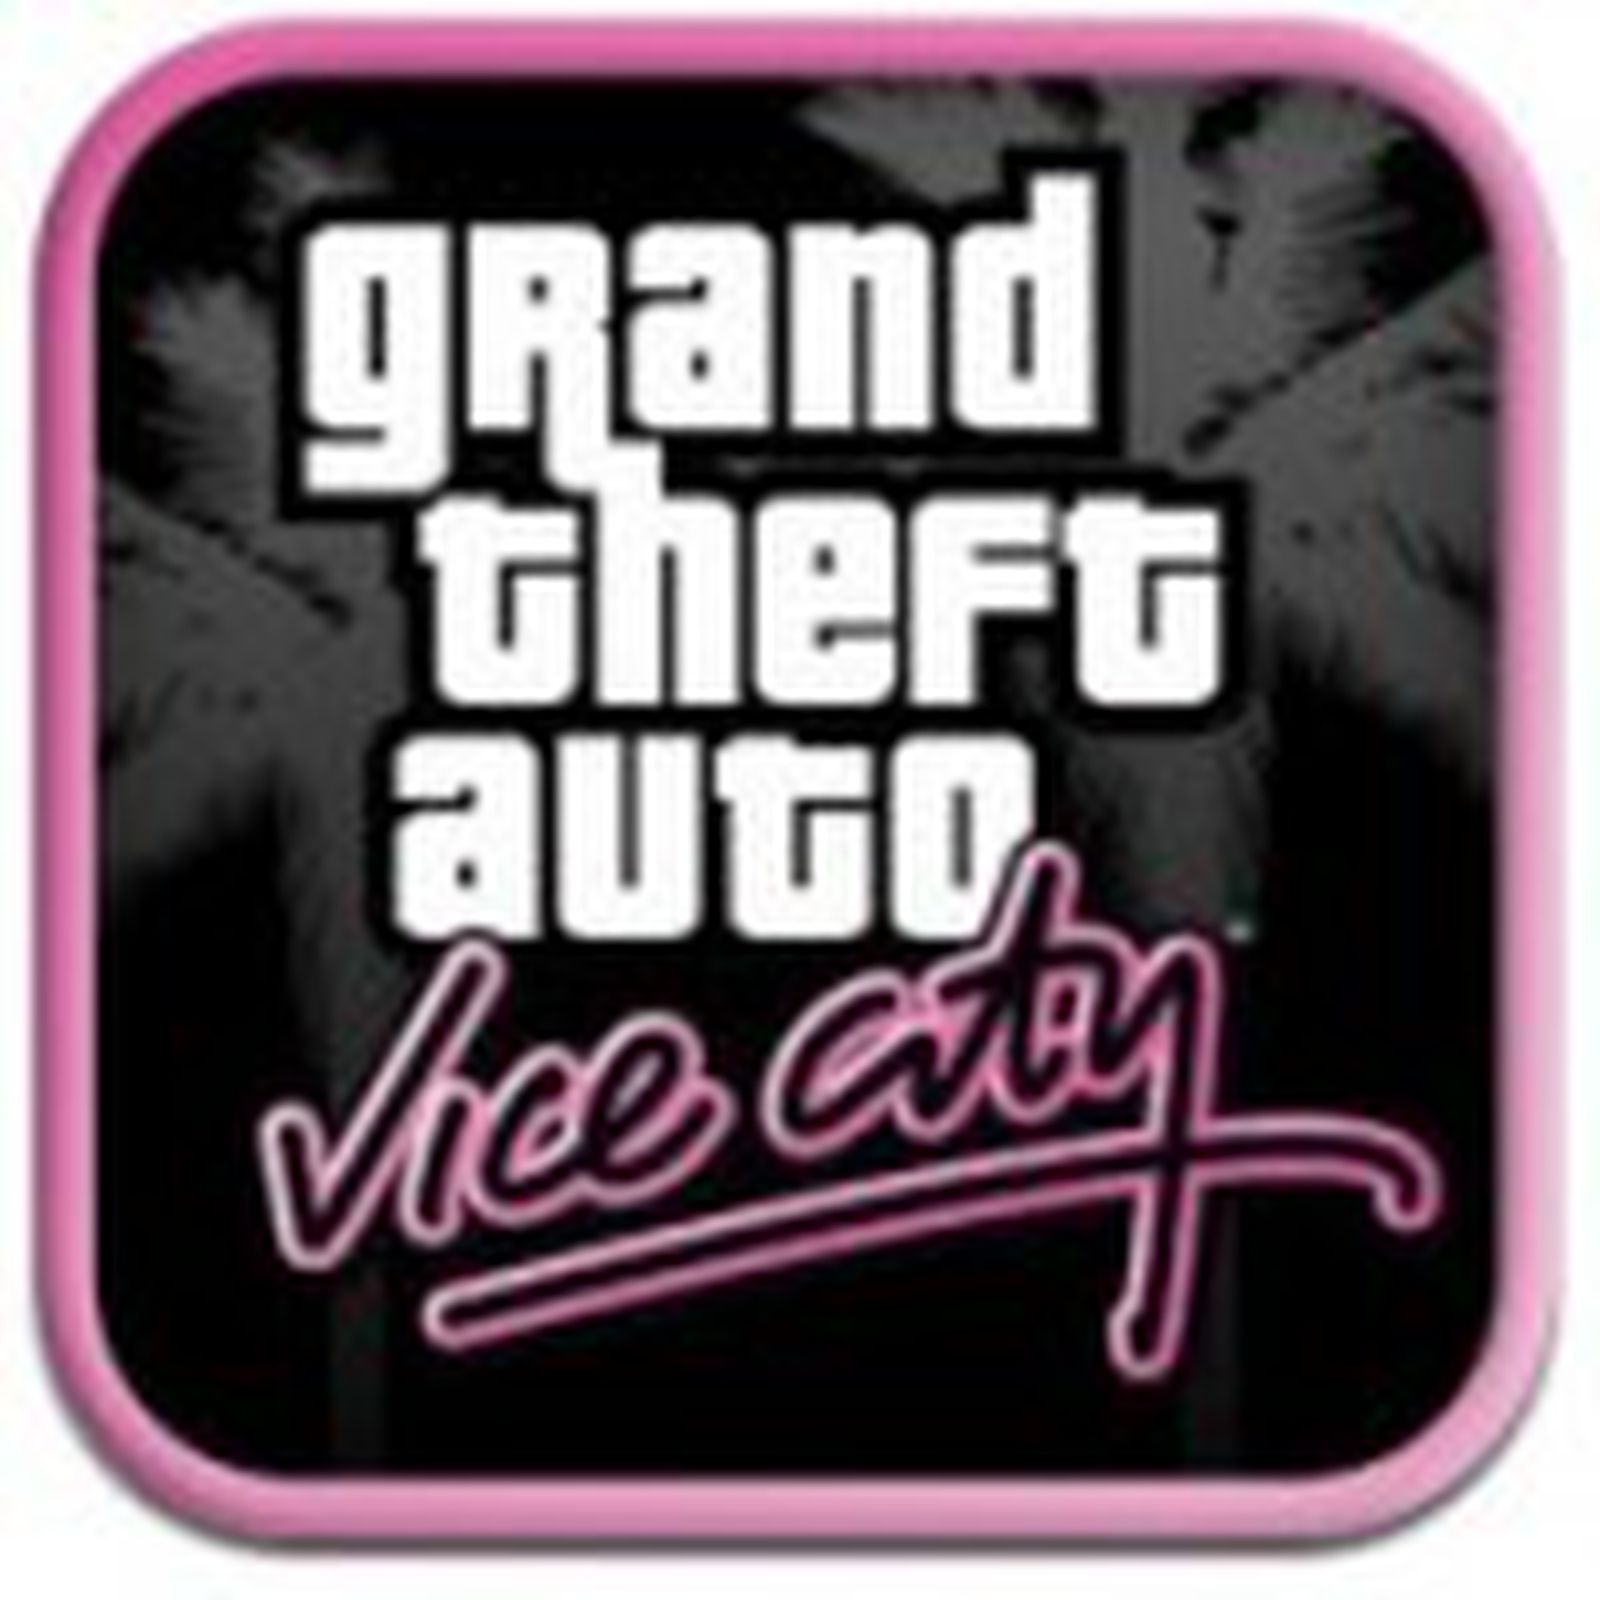 Grand Theft Auto: Vice City on the App Store